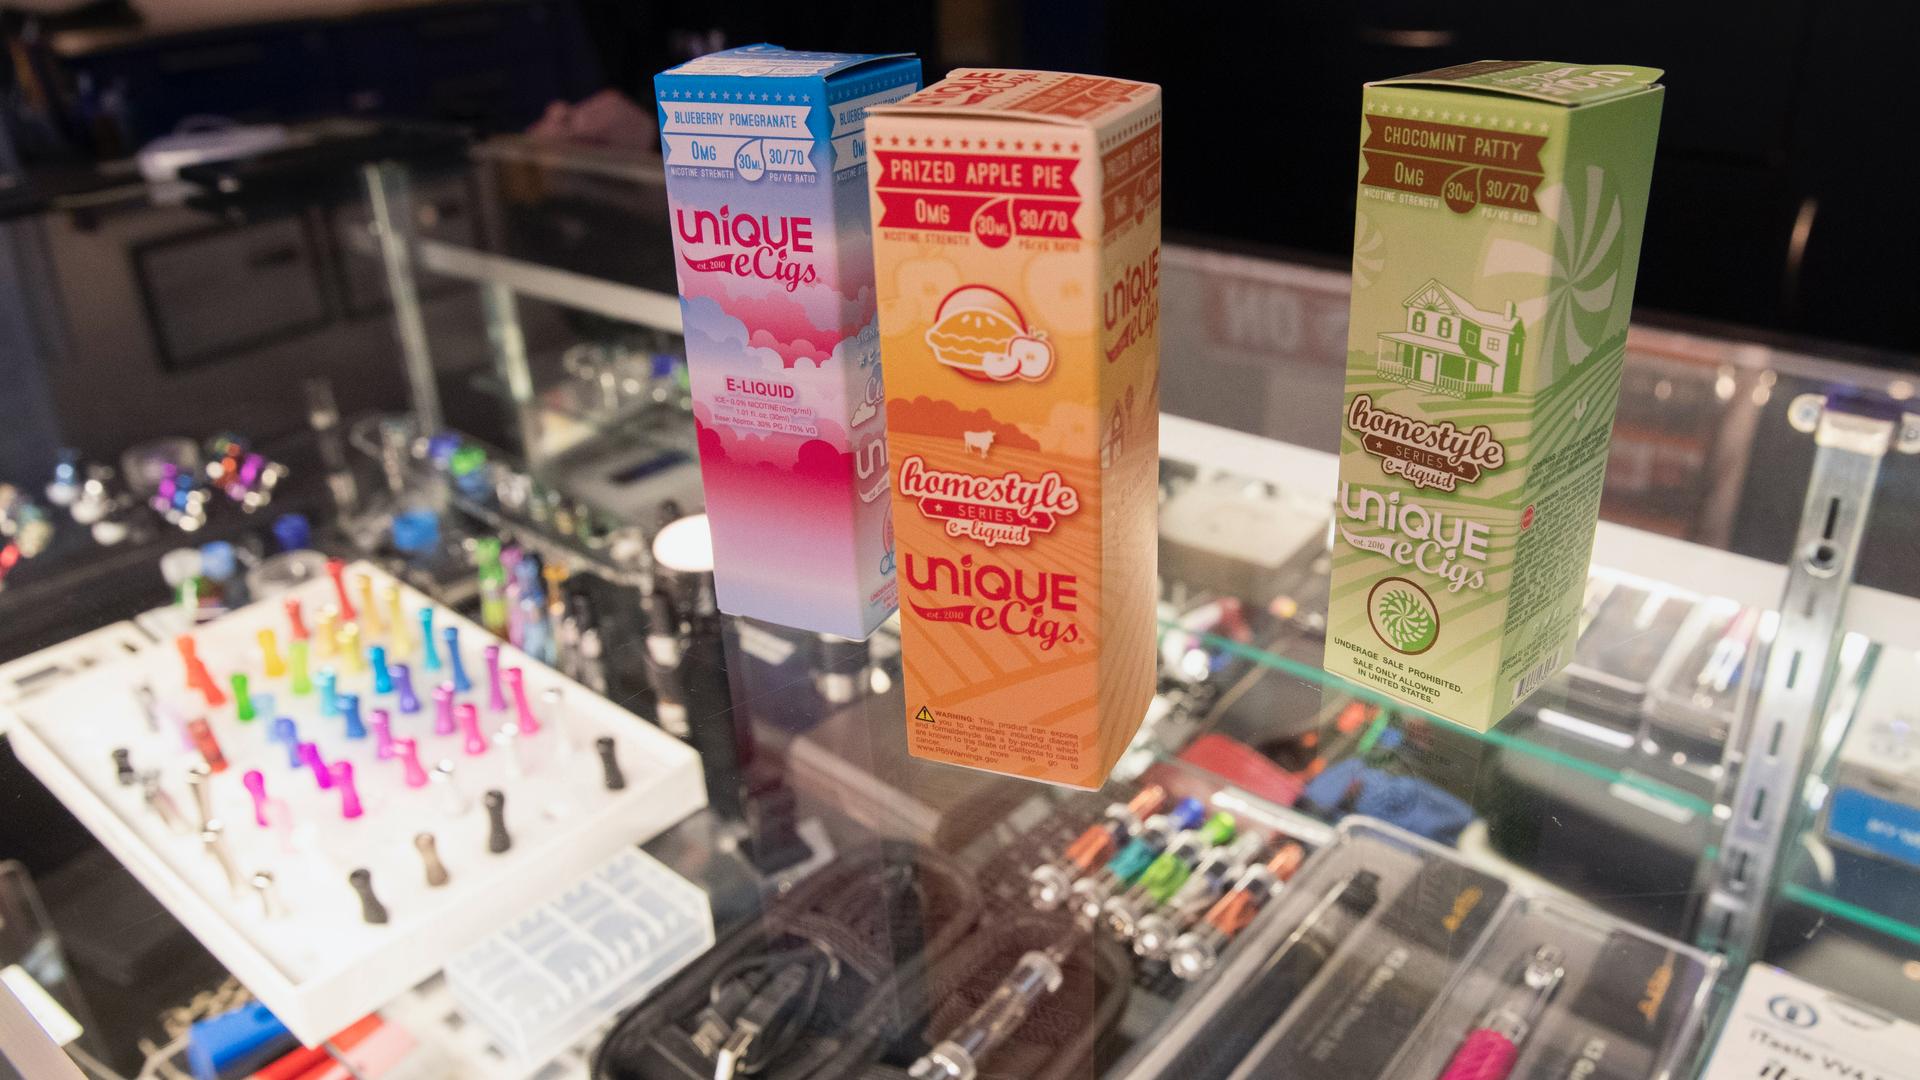 Flavored vaping liquids and devices on display at a New York store on Jan. 2, 2020.